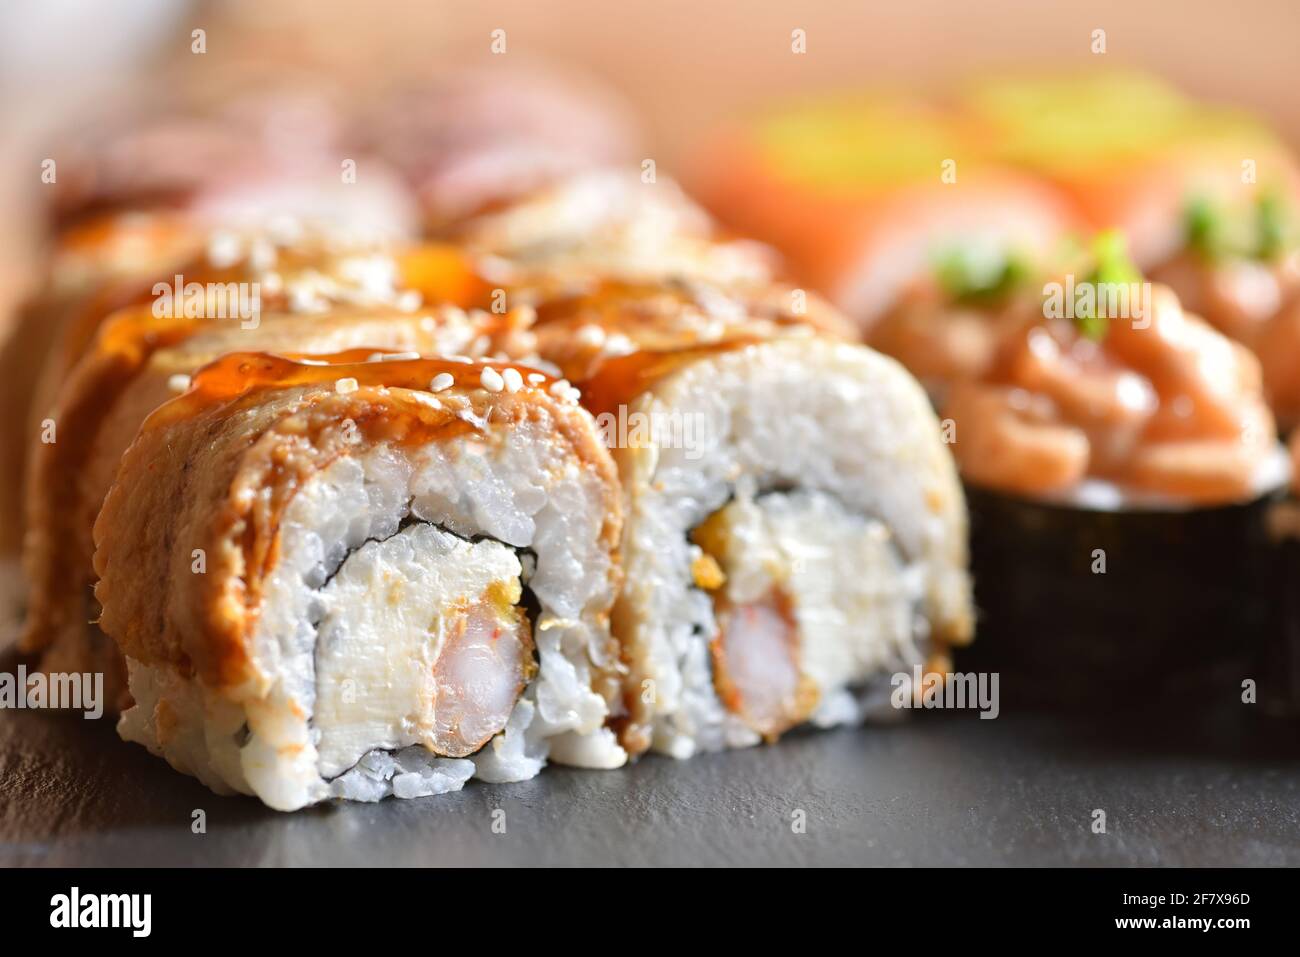 Appetizing sushi roll with eel Stock Photo